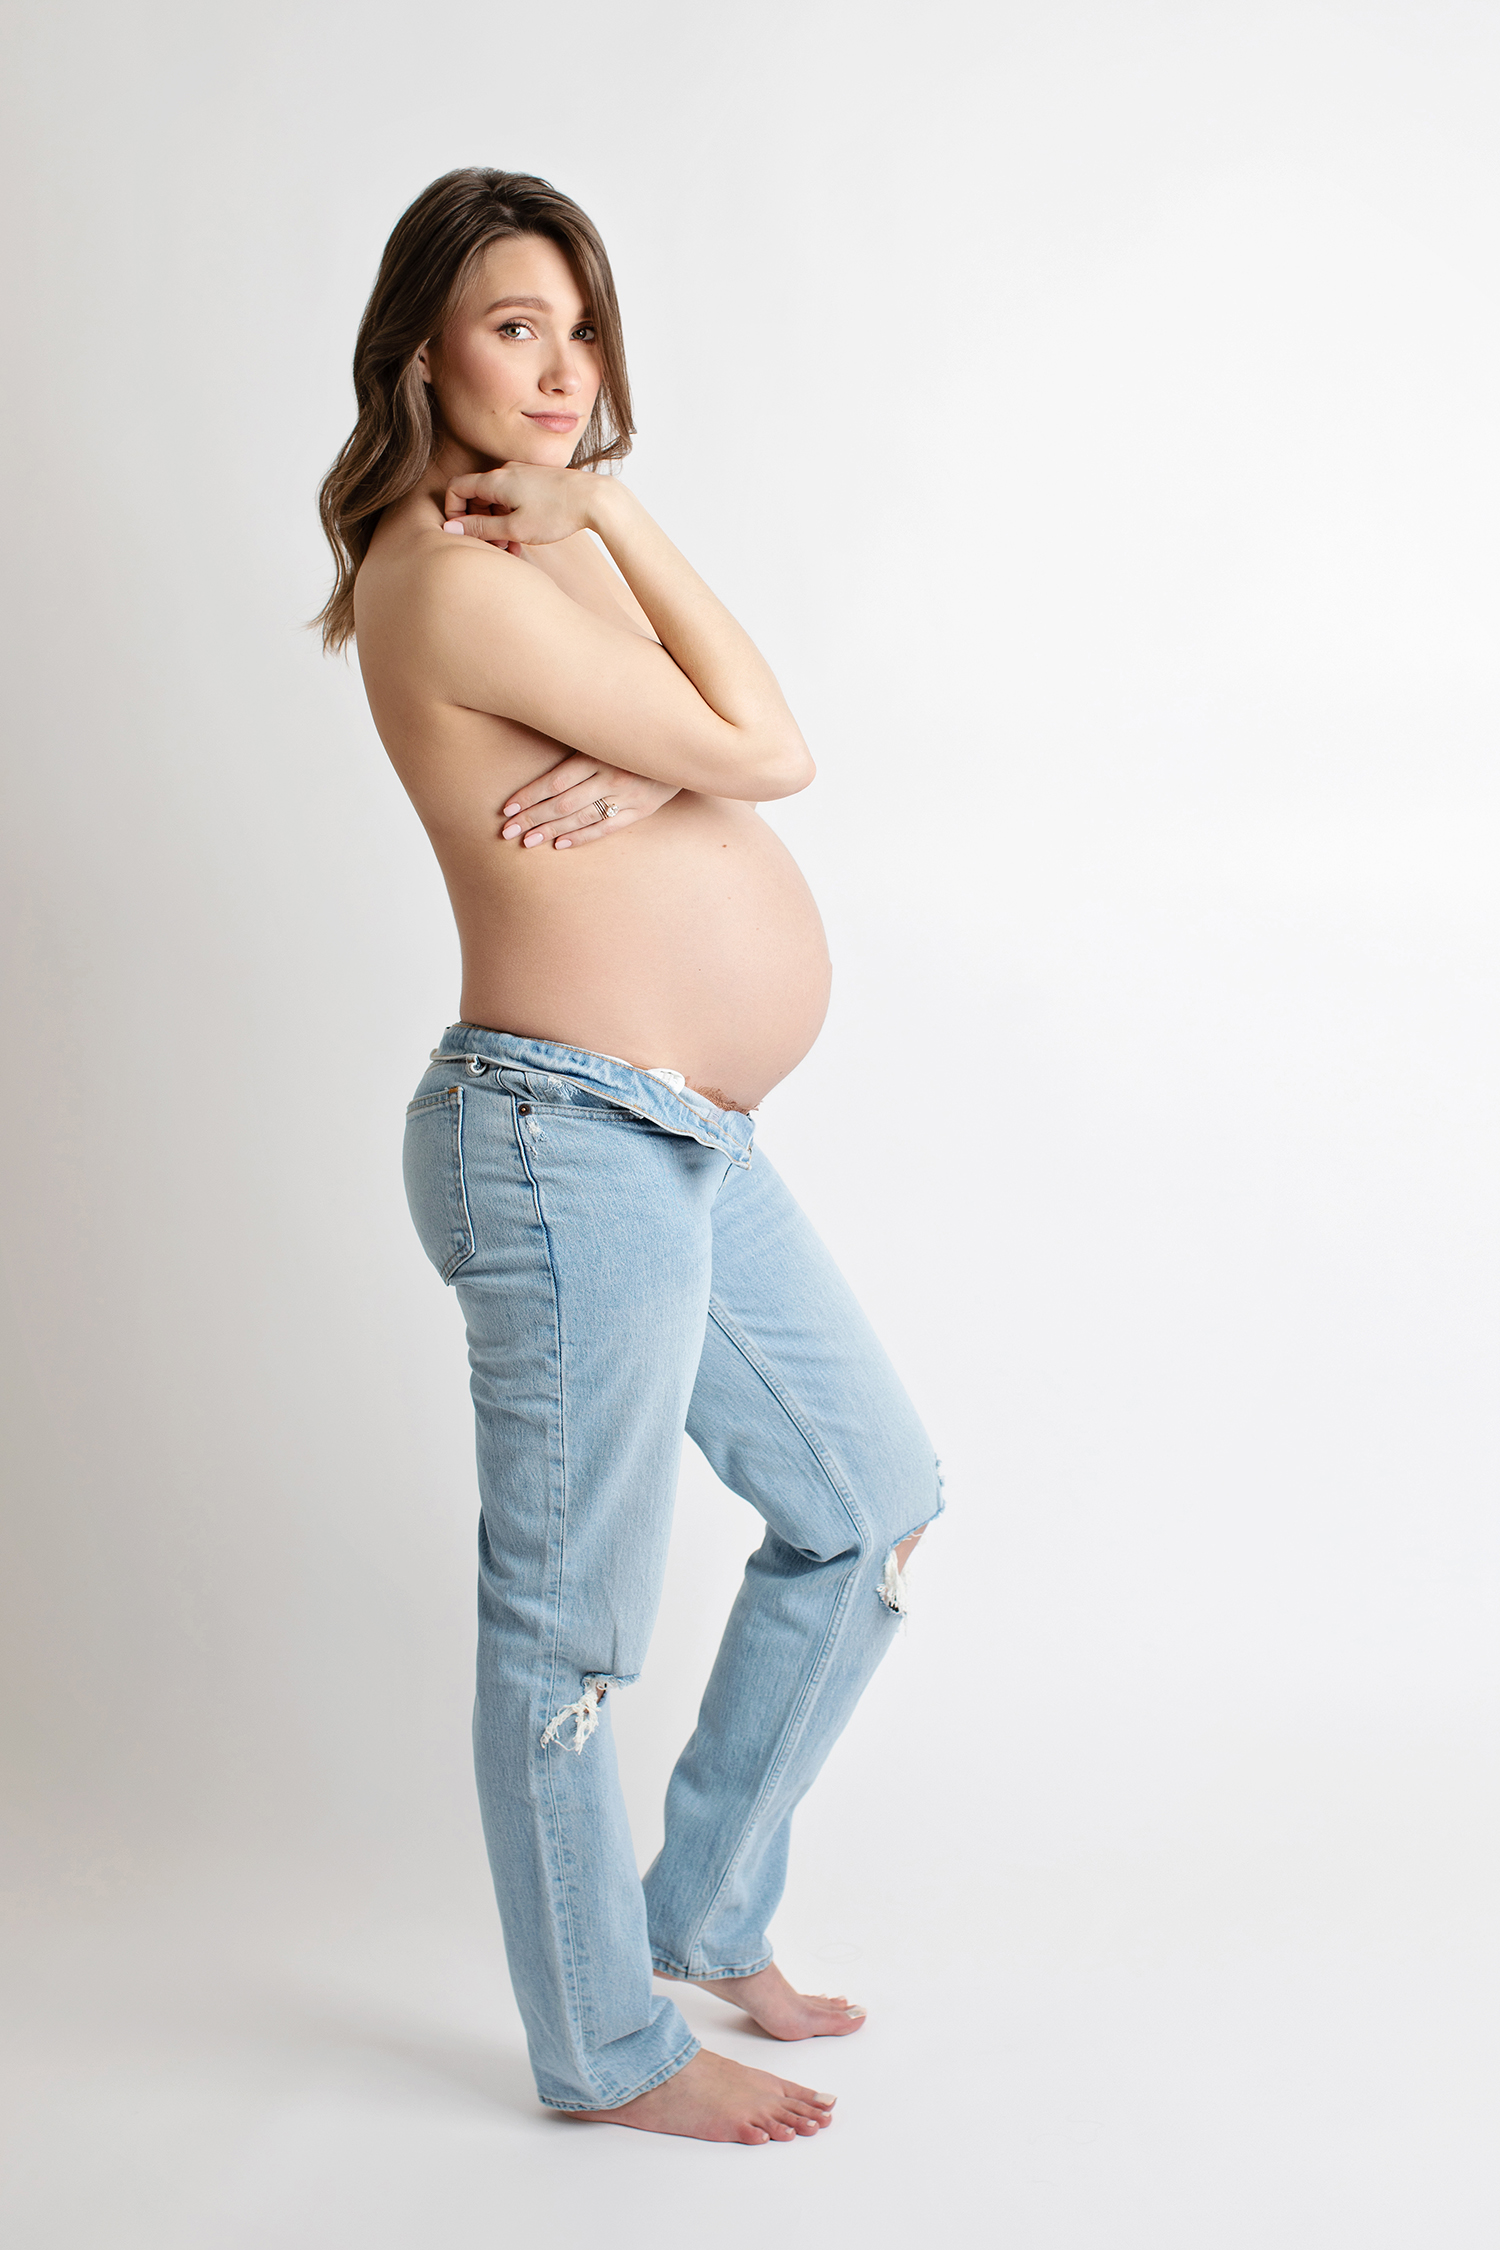 A maternity photo of a woman in jeans.